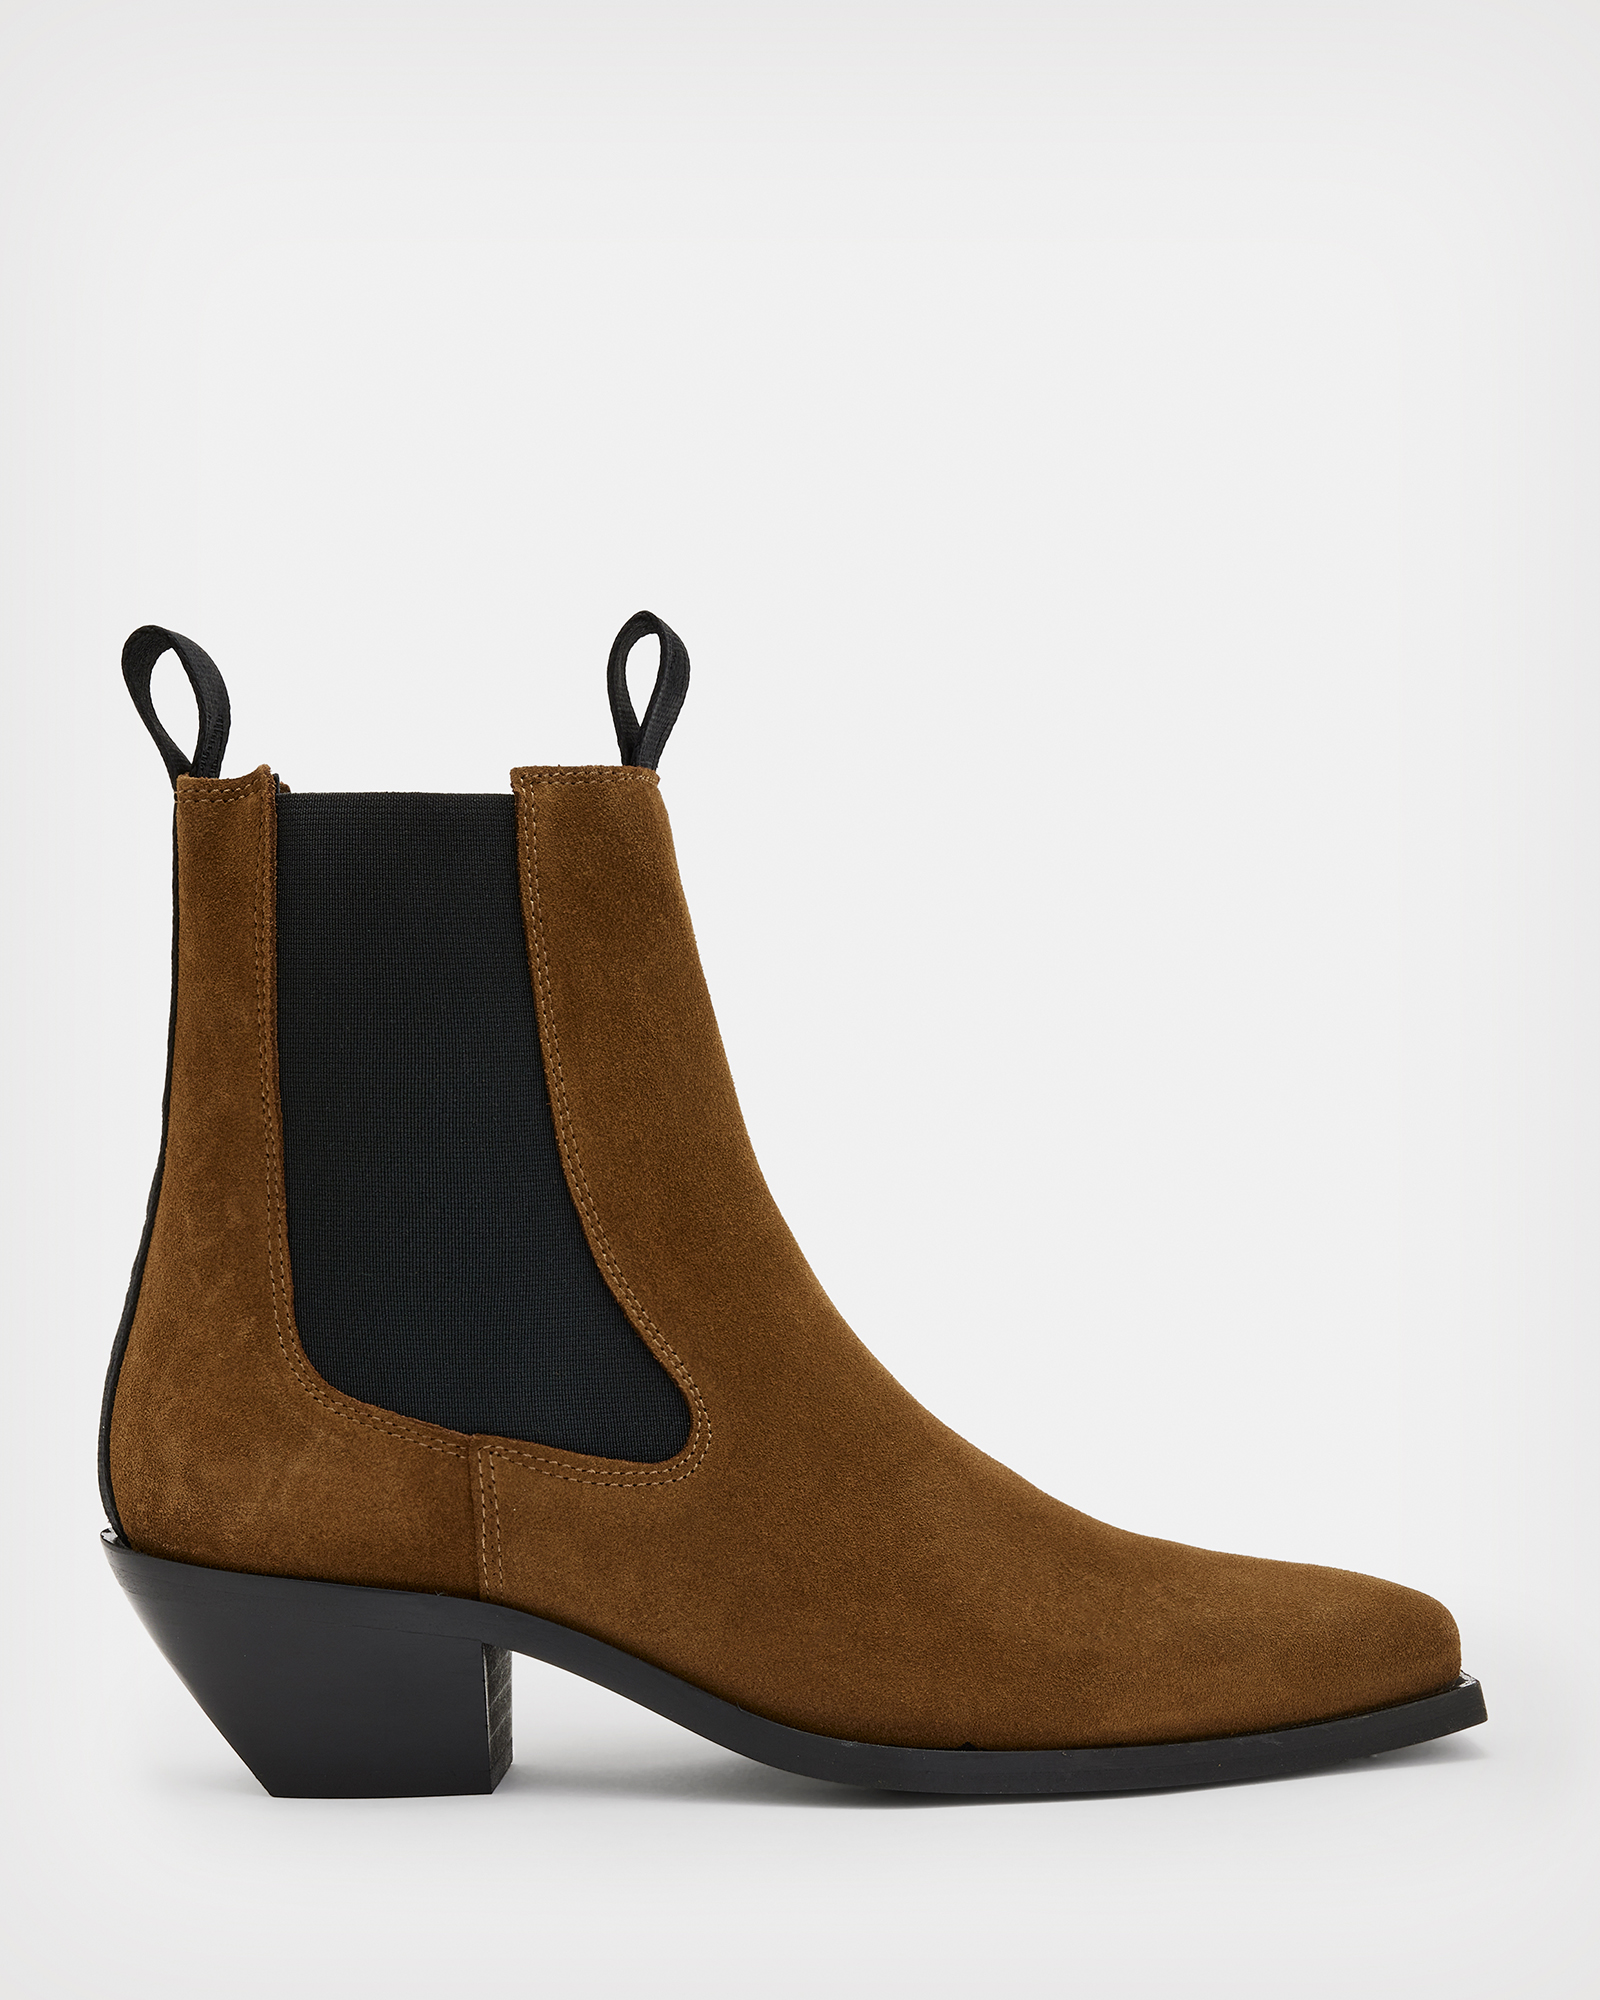 AllSaints Vally Suede Boots